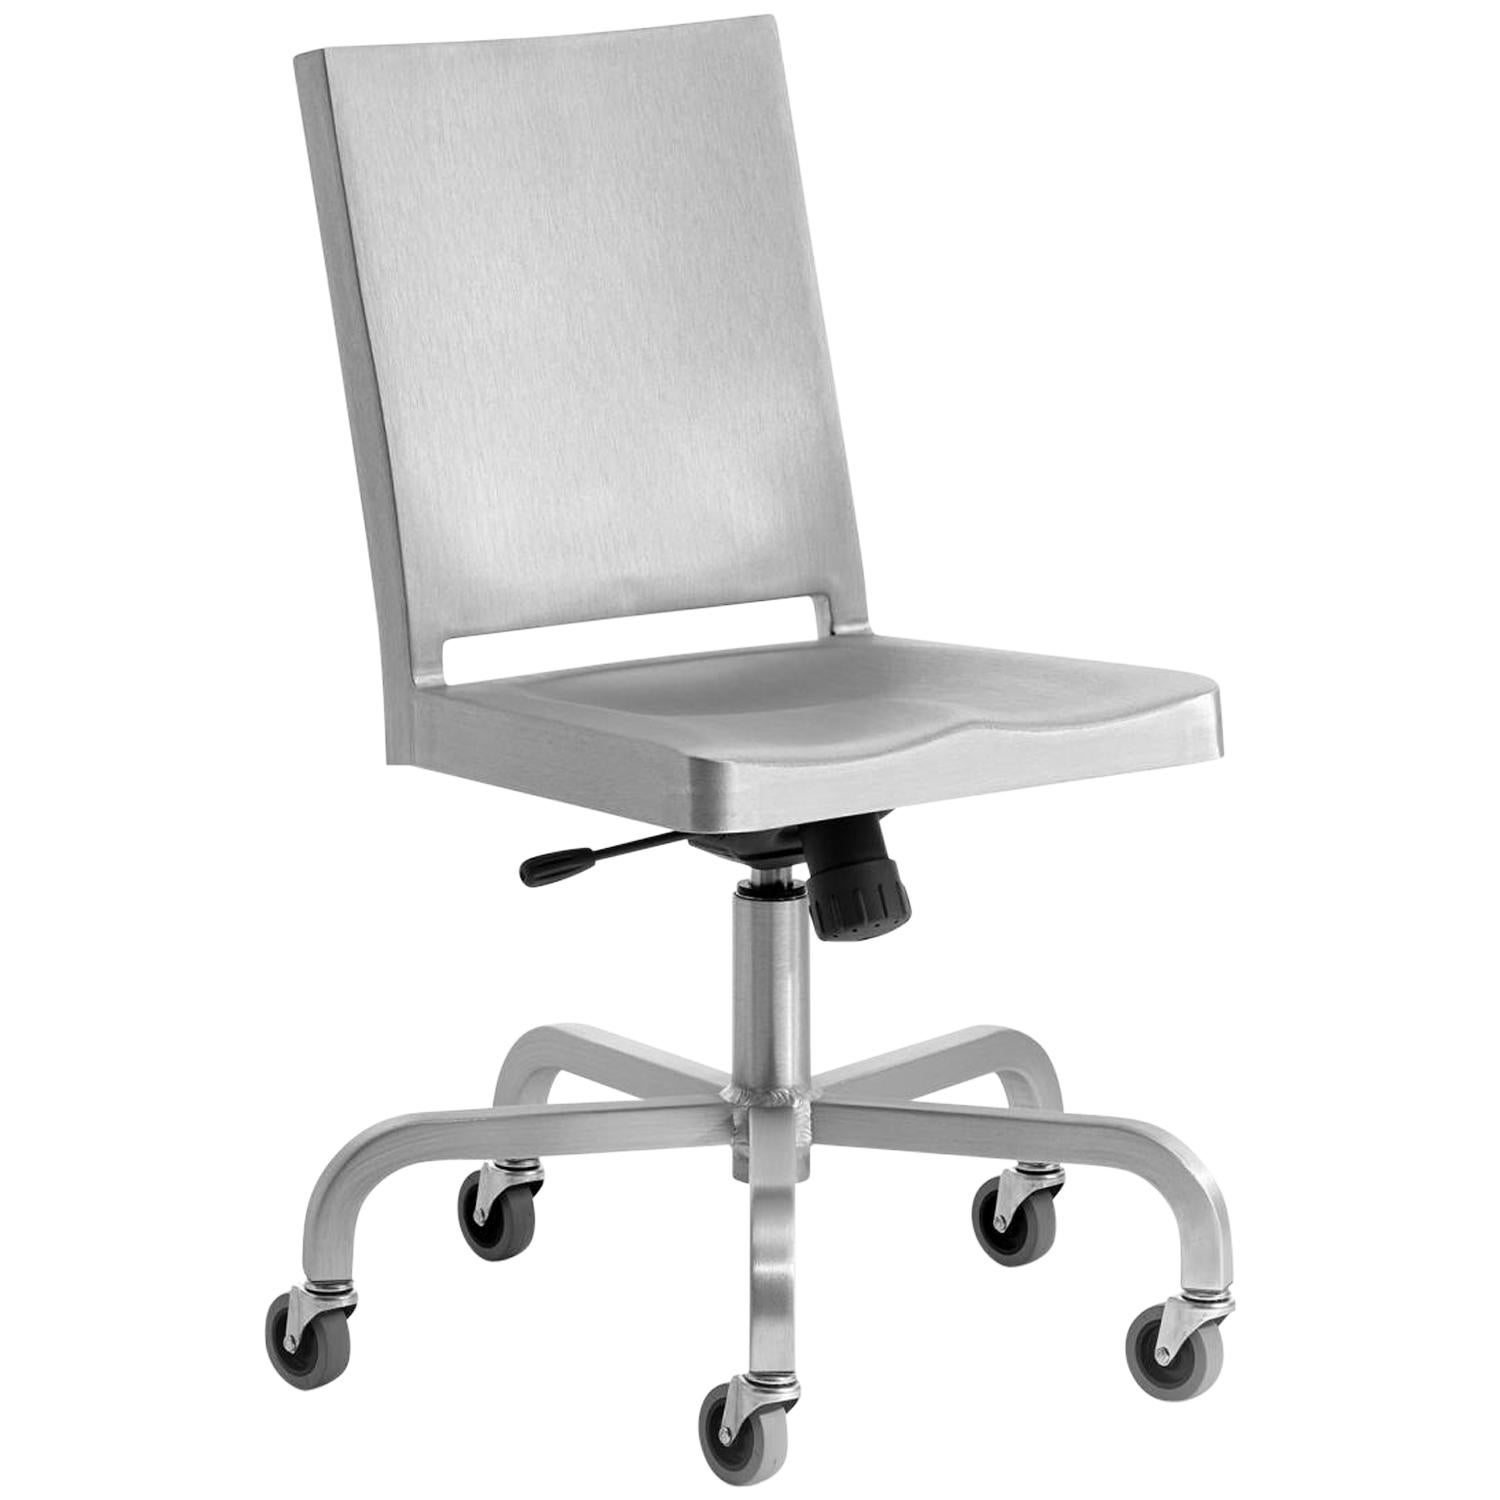 Emeco Hudson Swivel Chair in Brushed Aluminum by Philippe Starck For Sale